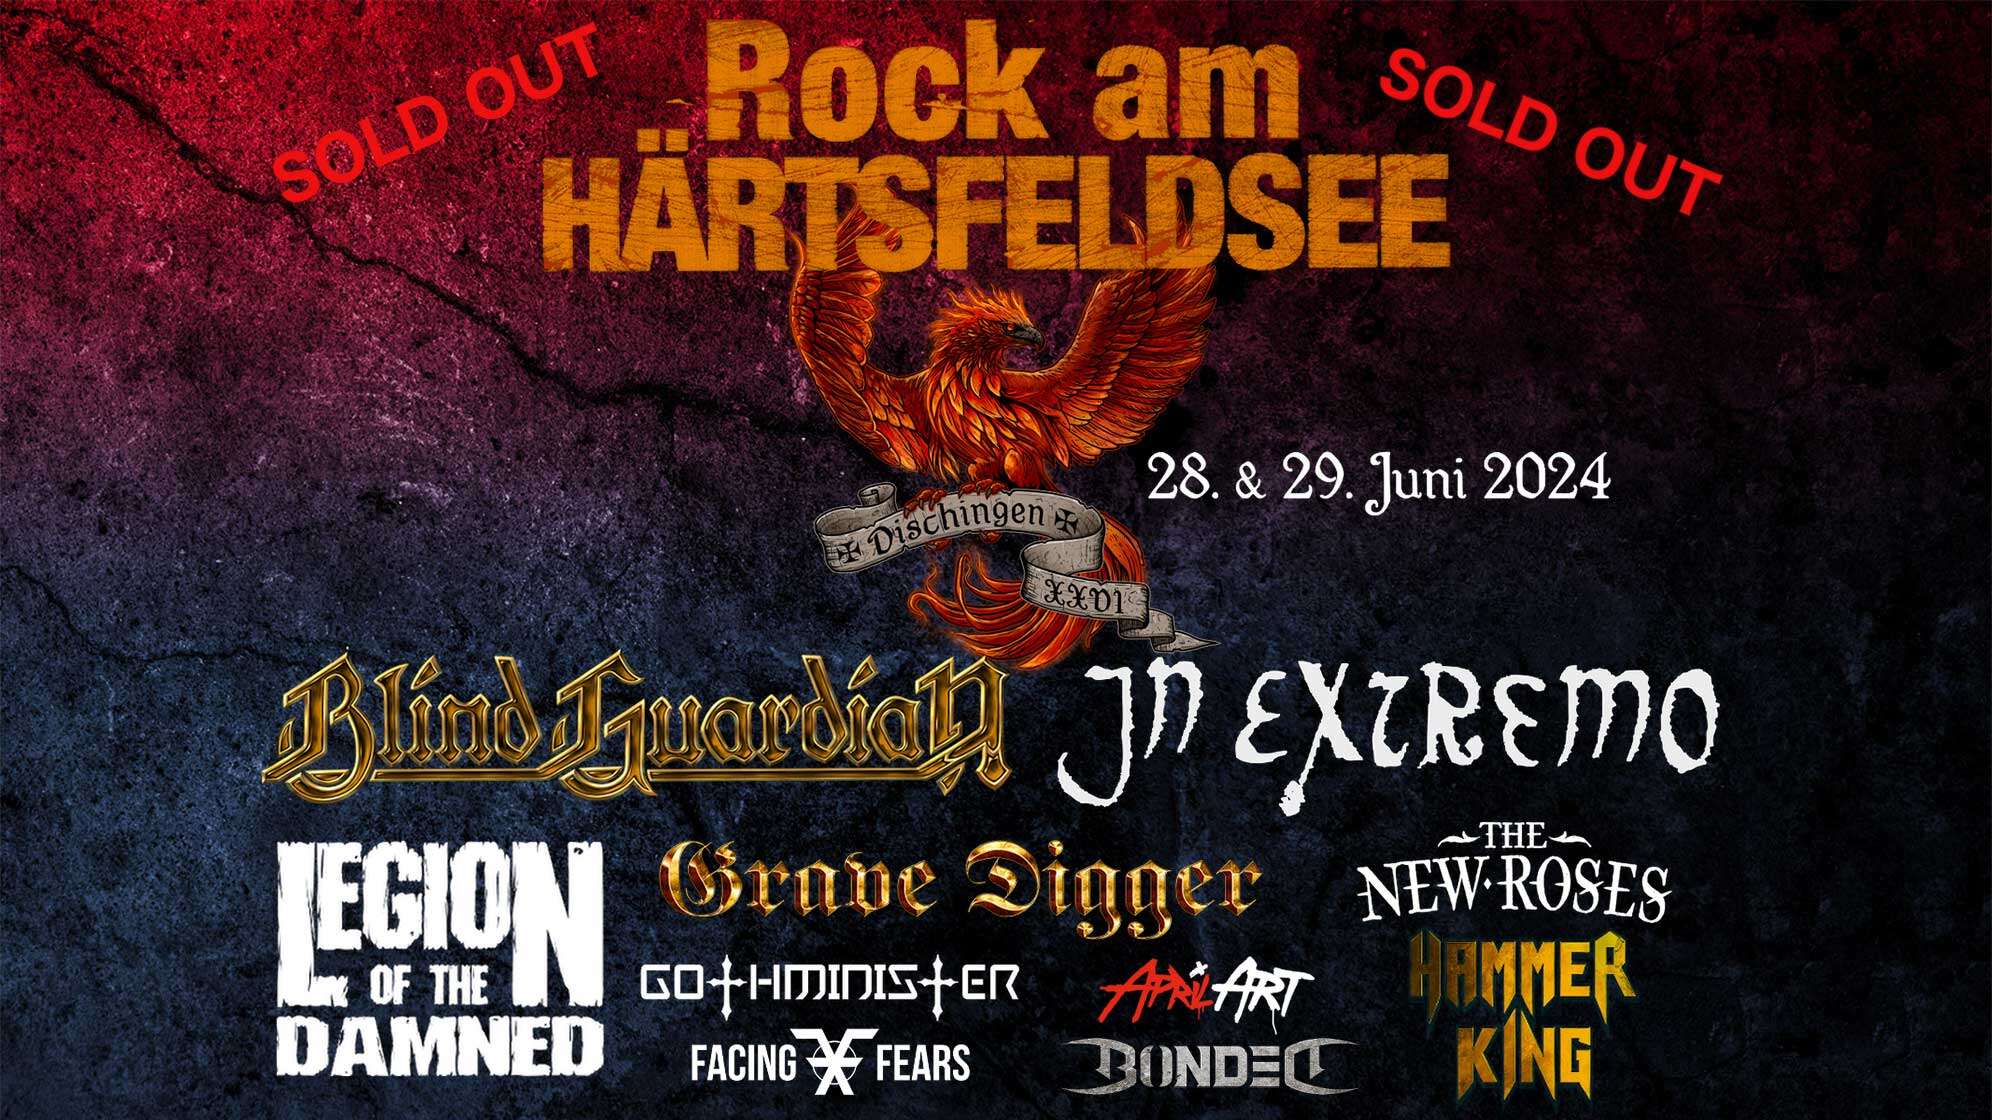 Das Lineup für das Rock am Härtsfeldsee: Blind Guardian, In Extremo, Legion of the Damned, The New Roses, Grave Digger, Bonded, Hammer King, Gothminister, April Art und Facing Fears